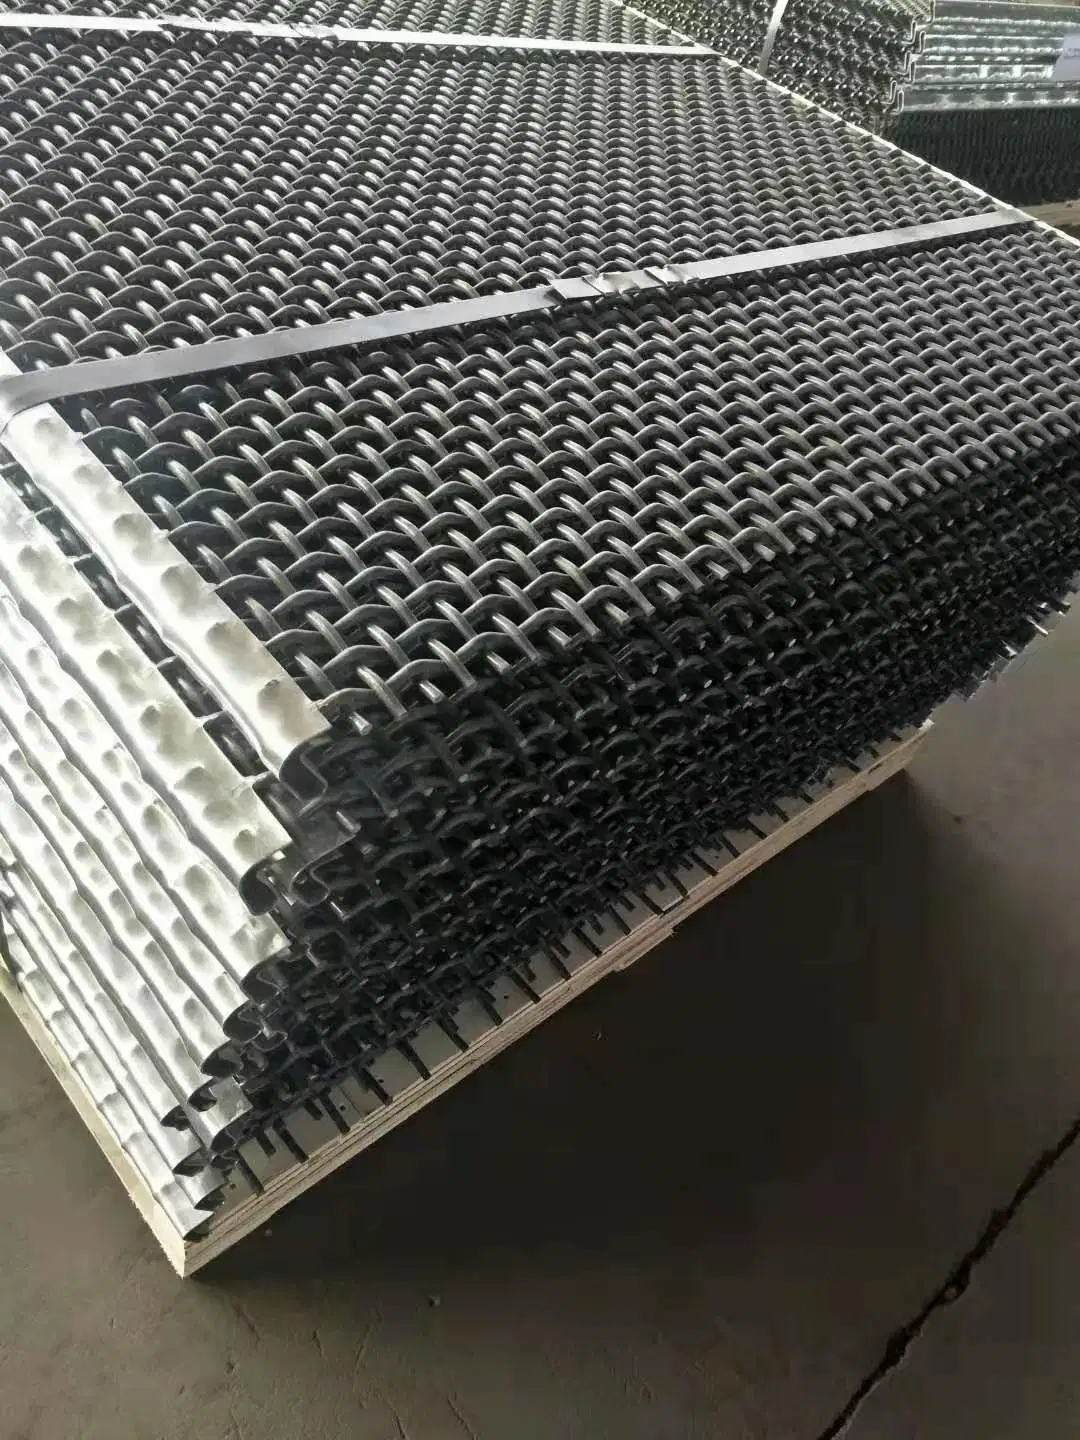 Tec-Sieve Vibrating Woven Wire Screen Cloth in Stainless Steel or Carbon Steel